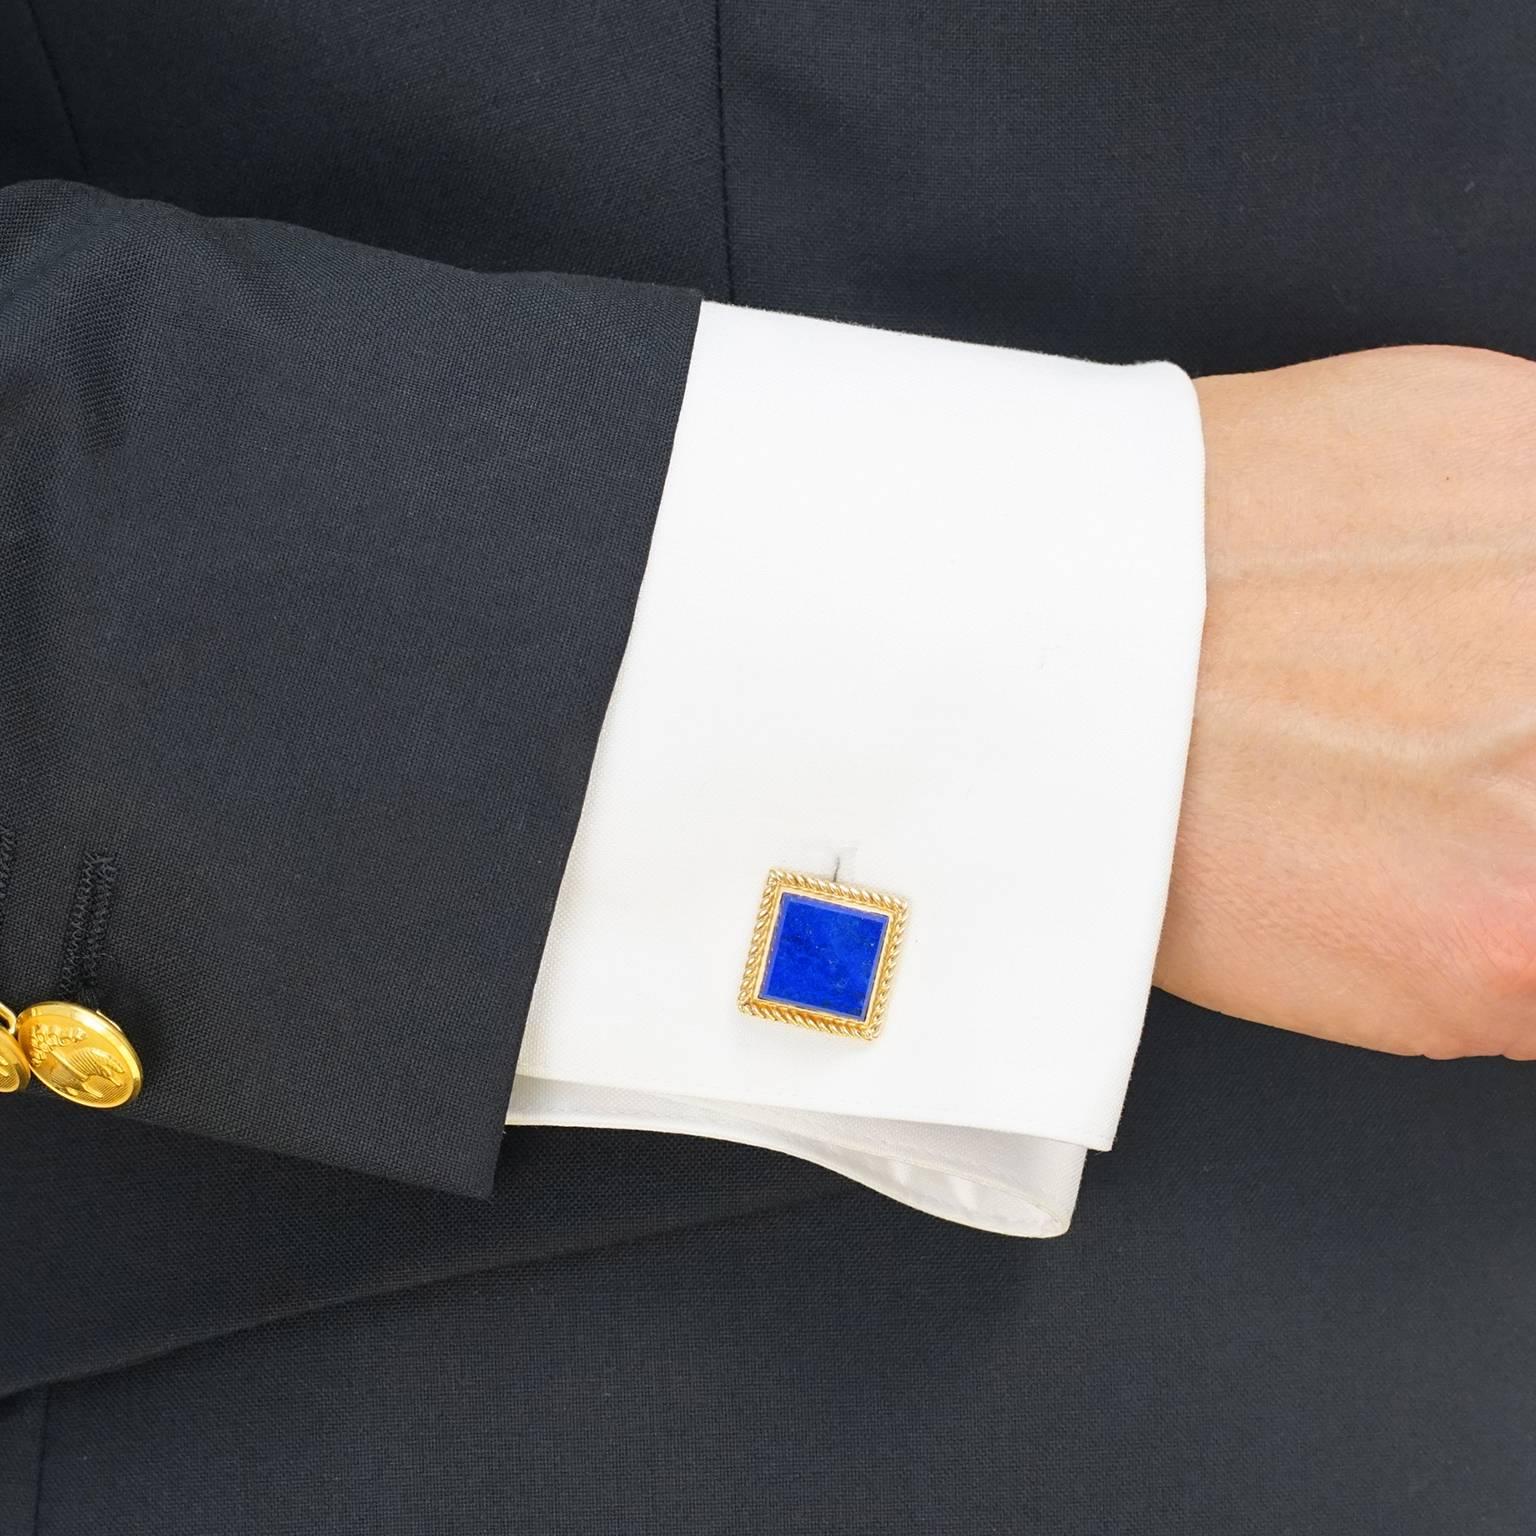 Circa 1950s, 14k, Tiffany & Co., American.  These elegant fifties cufflinks by Tiffany & Co. feature lush, finely figured gold-flecked lapis framed in a classic cable-twist border. Made in eighteen-karat yellow gold, they will add a harmonious